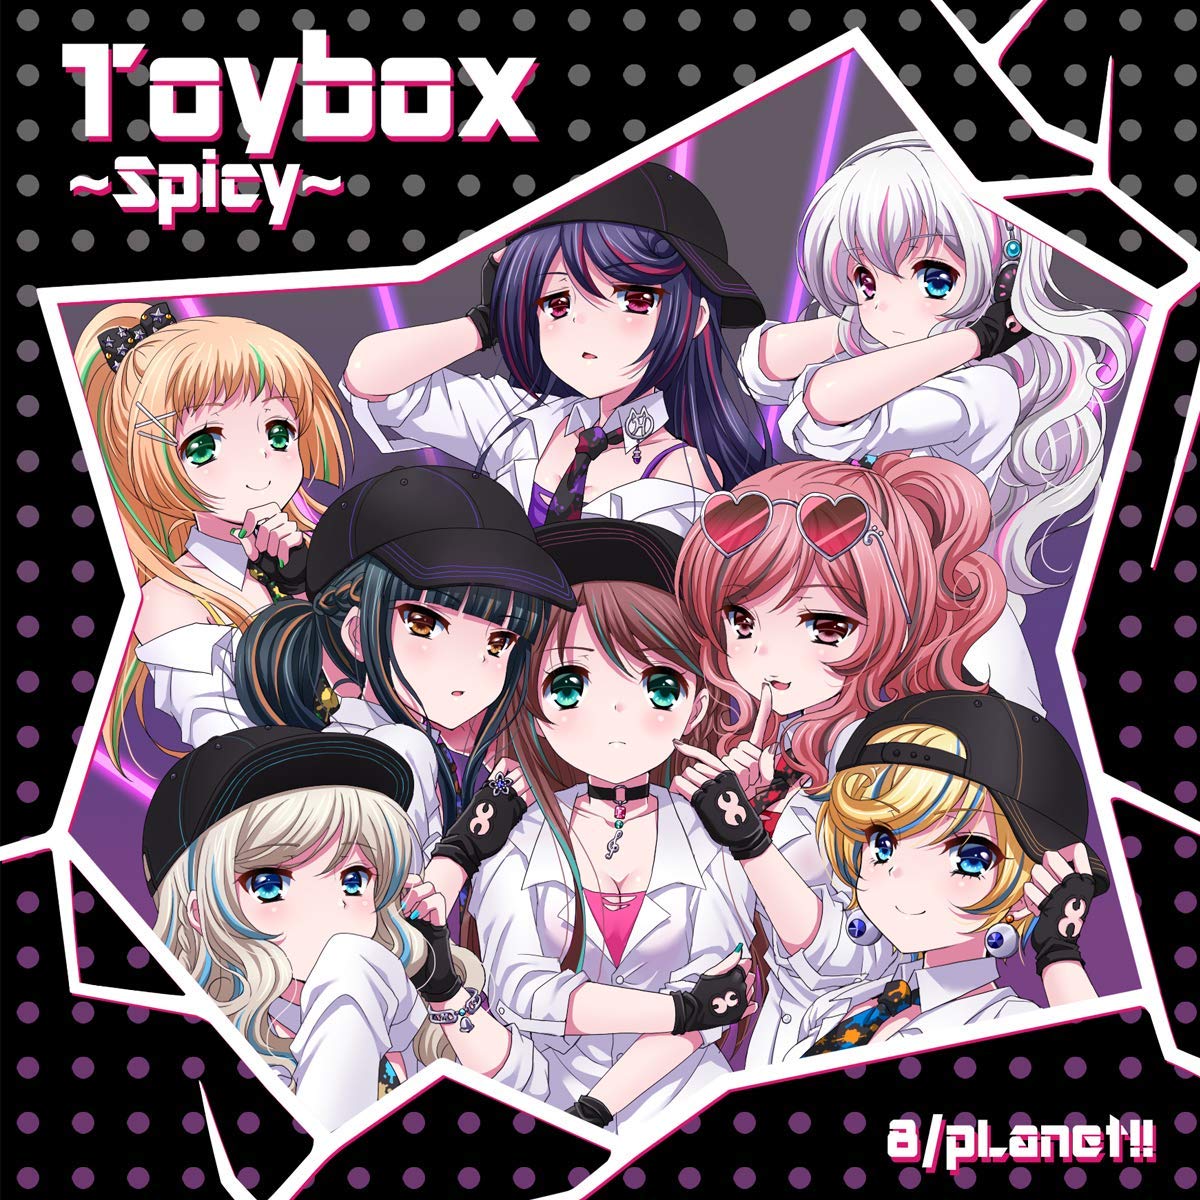 8:planet「Toybox~Spicy~(Single)」